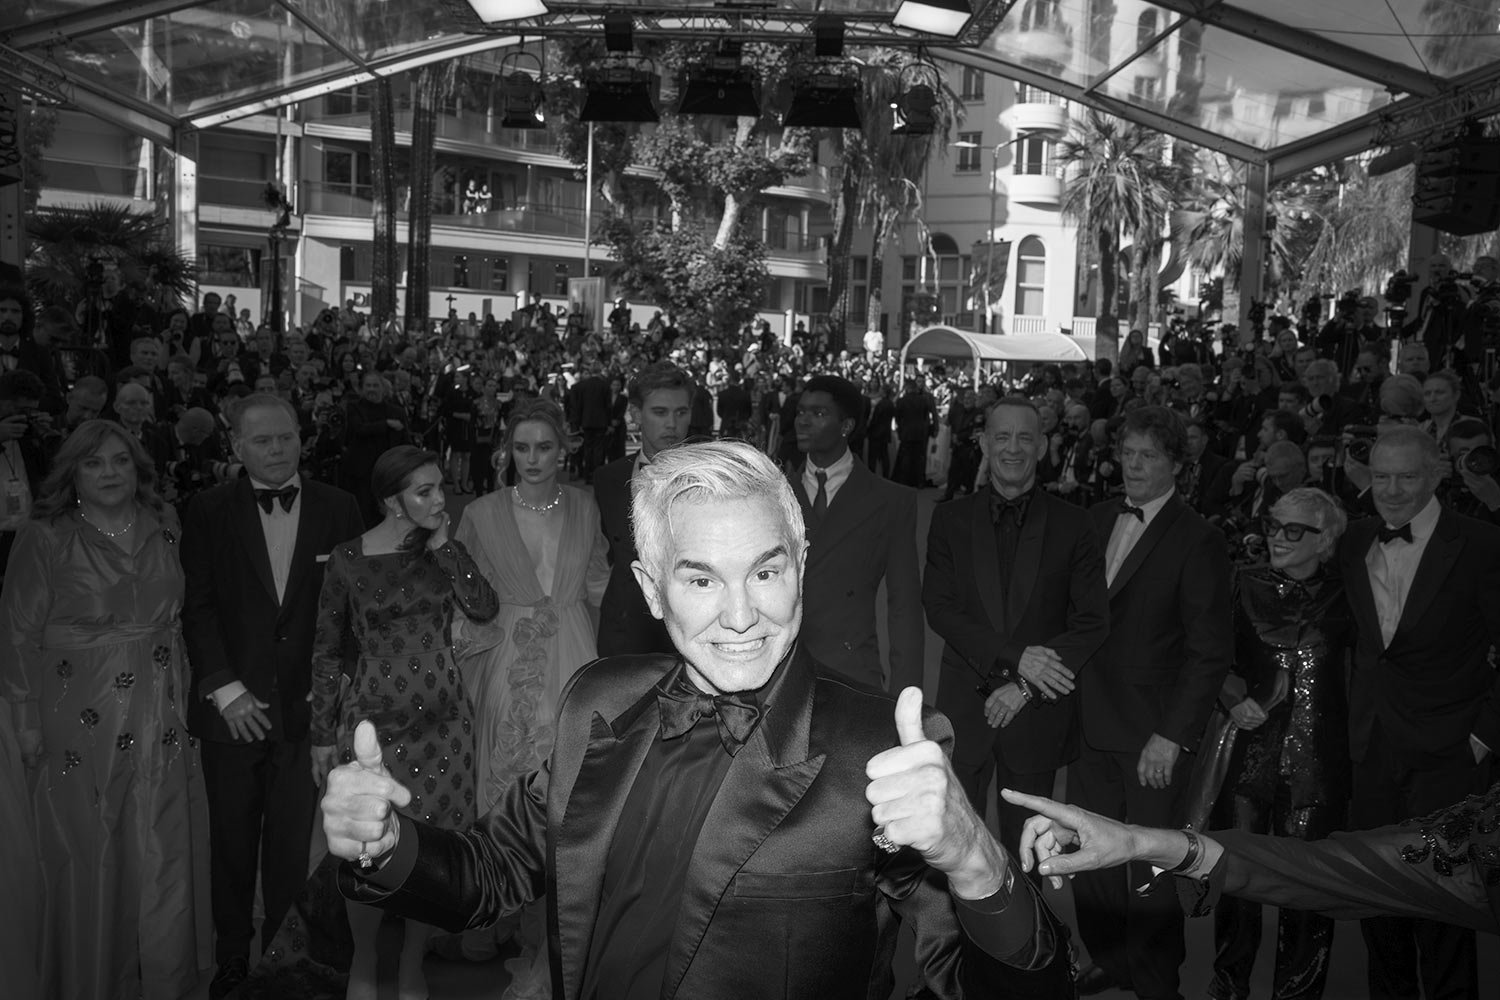  Director Baz Luhrmann flashes two thumbs up as he poses for photographers upon arrival at the premiere of the film 'Elvis' at the 75th international film festival, Cannes, southern France, Wednesday, May 25, 2022. (AP Photo/Petros Giannakouris) 